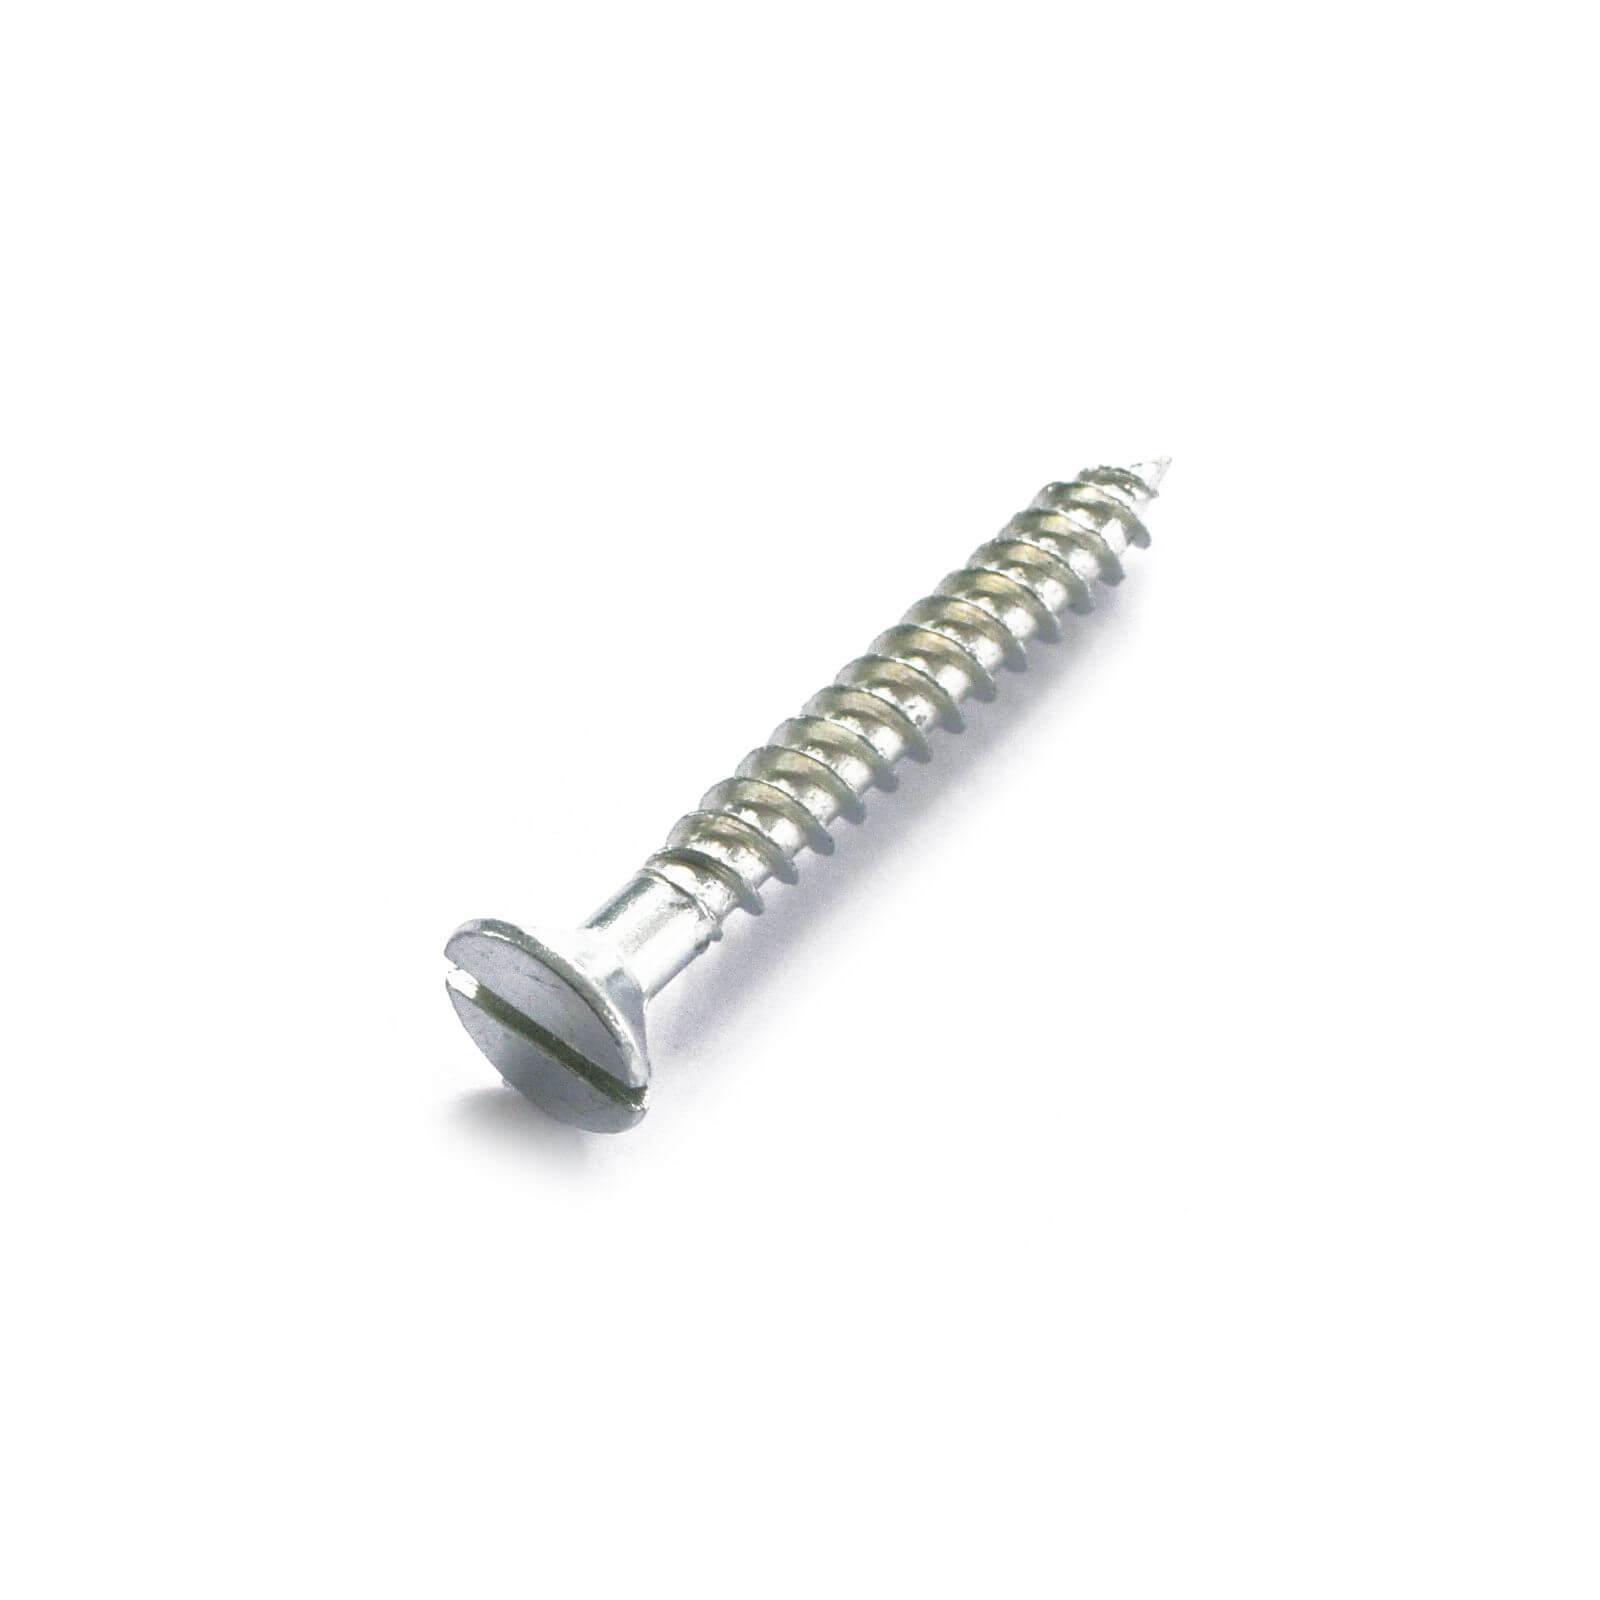 Wood Screw - Countersunk - Bright Zinc Plated - 4 x 40mm - 10 Pack